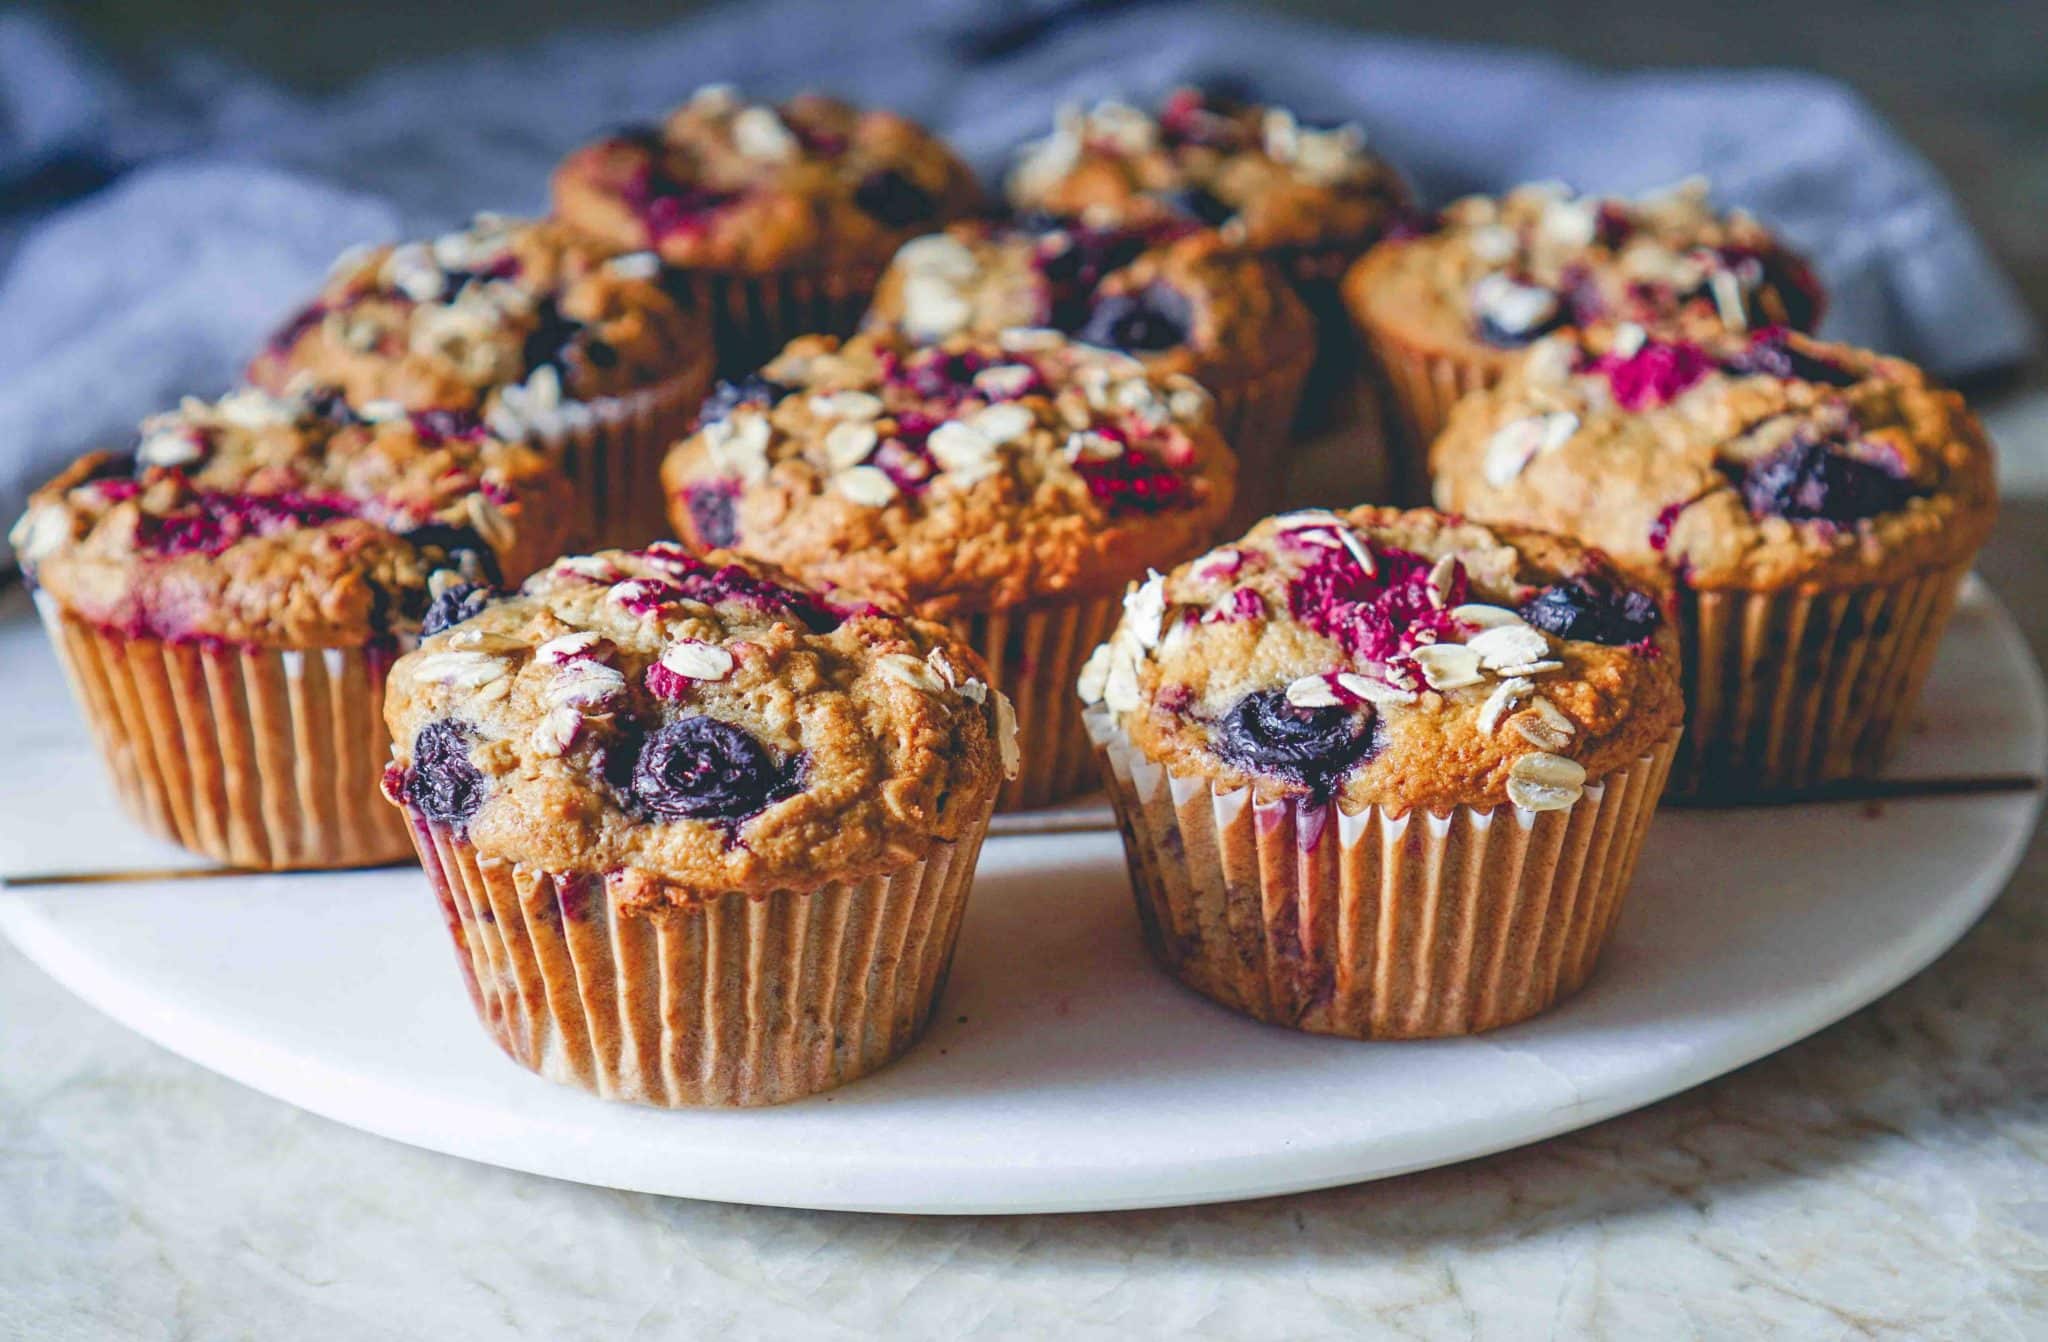 Vegan Gluten-free Oatmeal Banana Muffins with Mixed Berries on white plate.